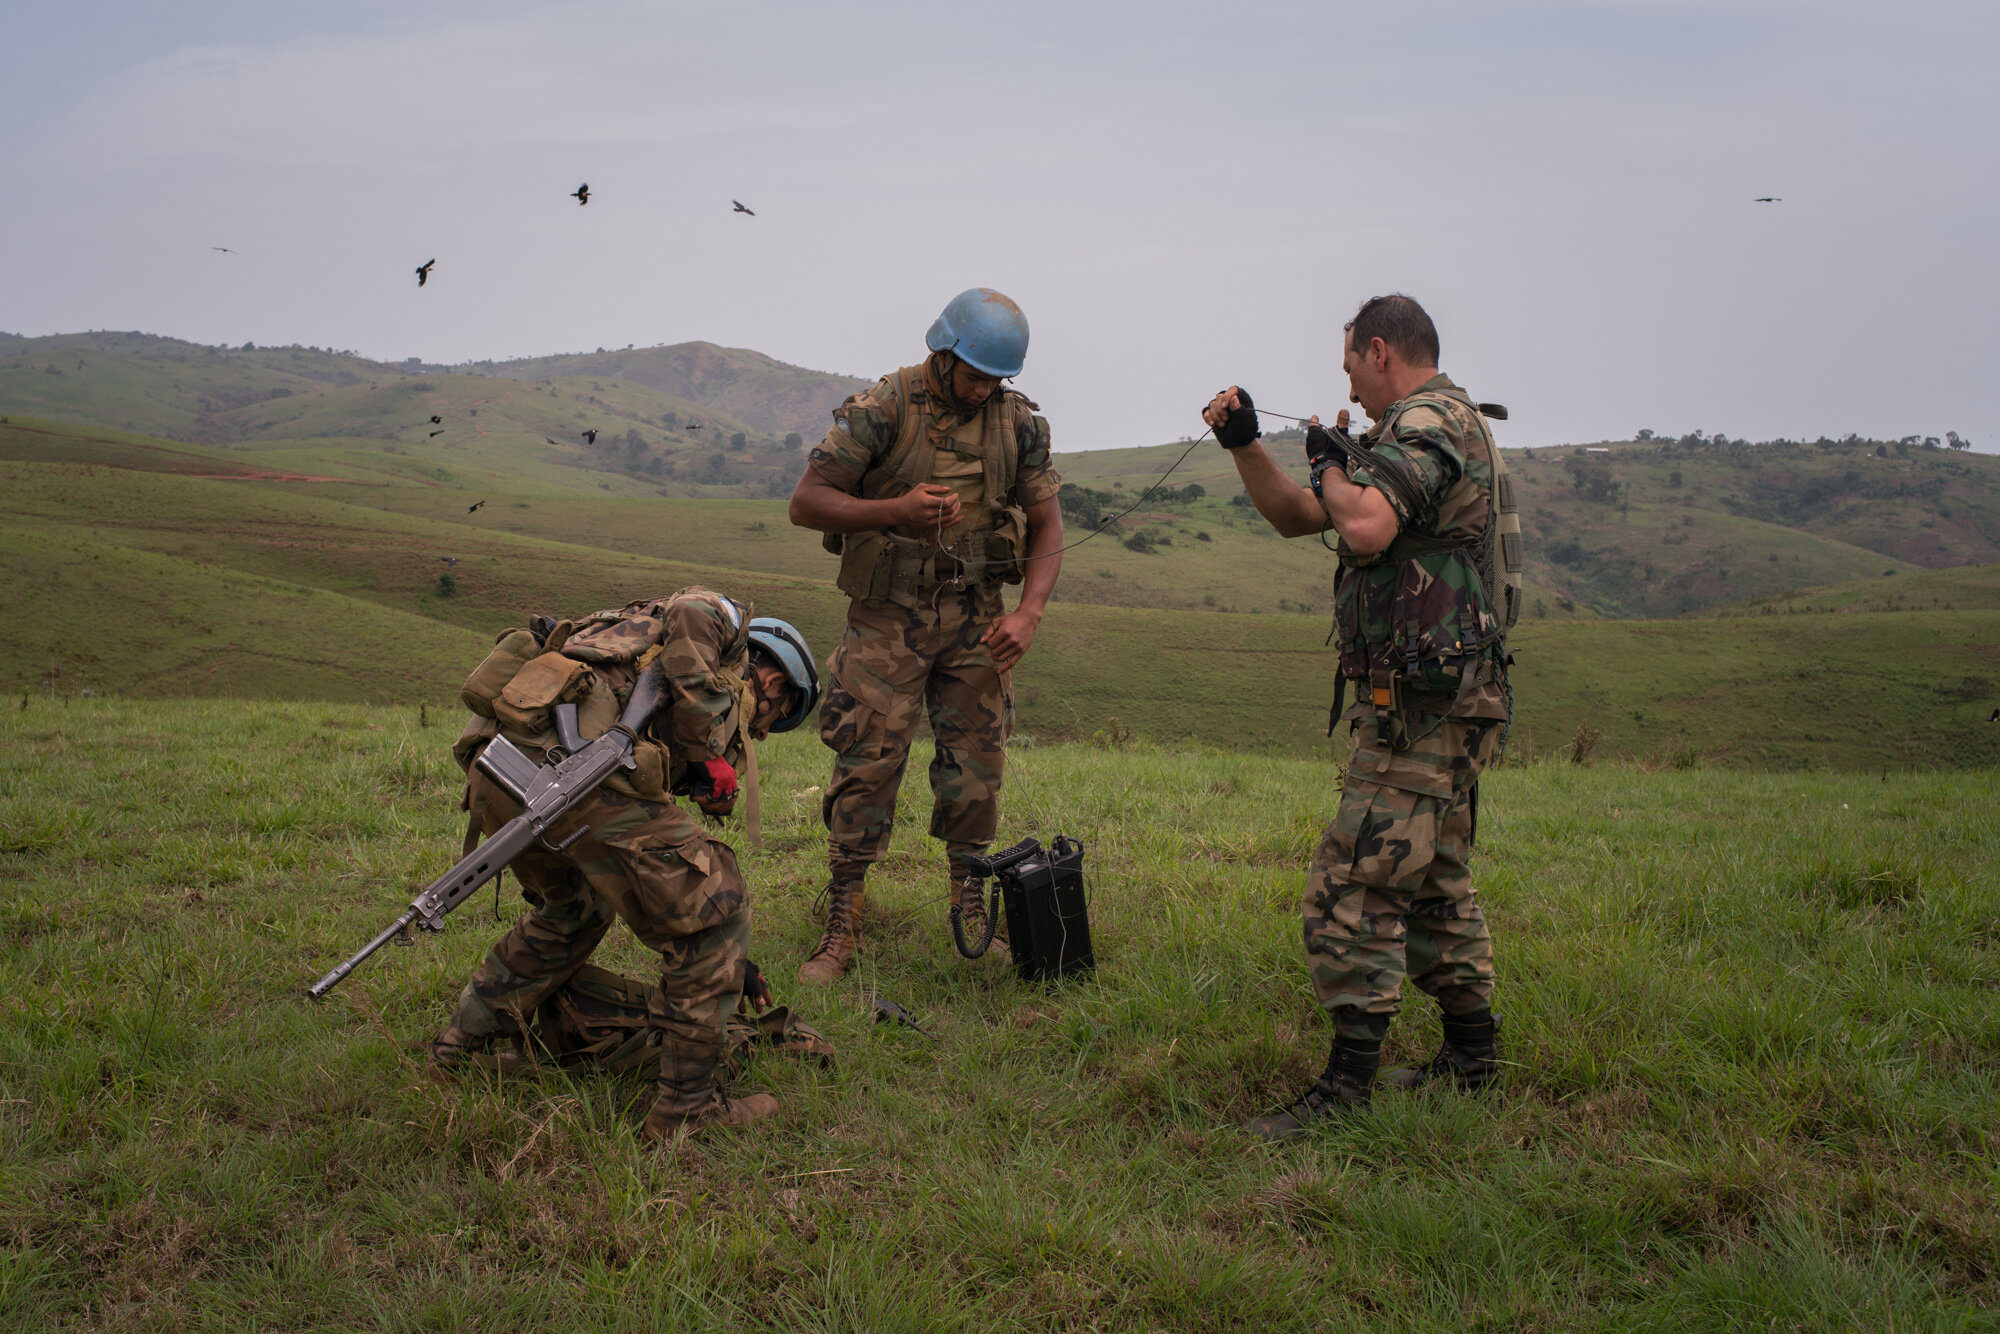  Soldiers from the Uruguyan forces of MONUSCO, the UN peacekeeping mission in the DRC, stops at Logo to try to make a radio call to 16 fellow soldiers who have gone missing for over 24 hours on a mission to reach Joo, one of the villages on the remot